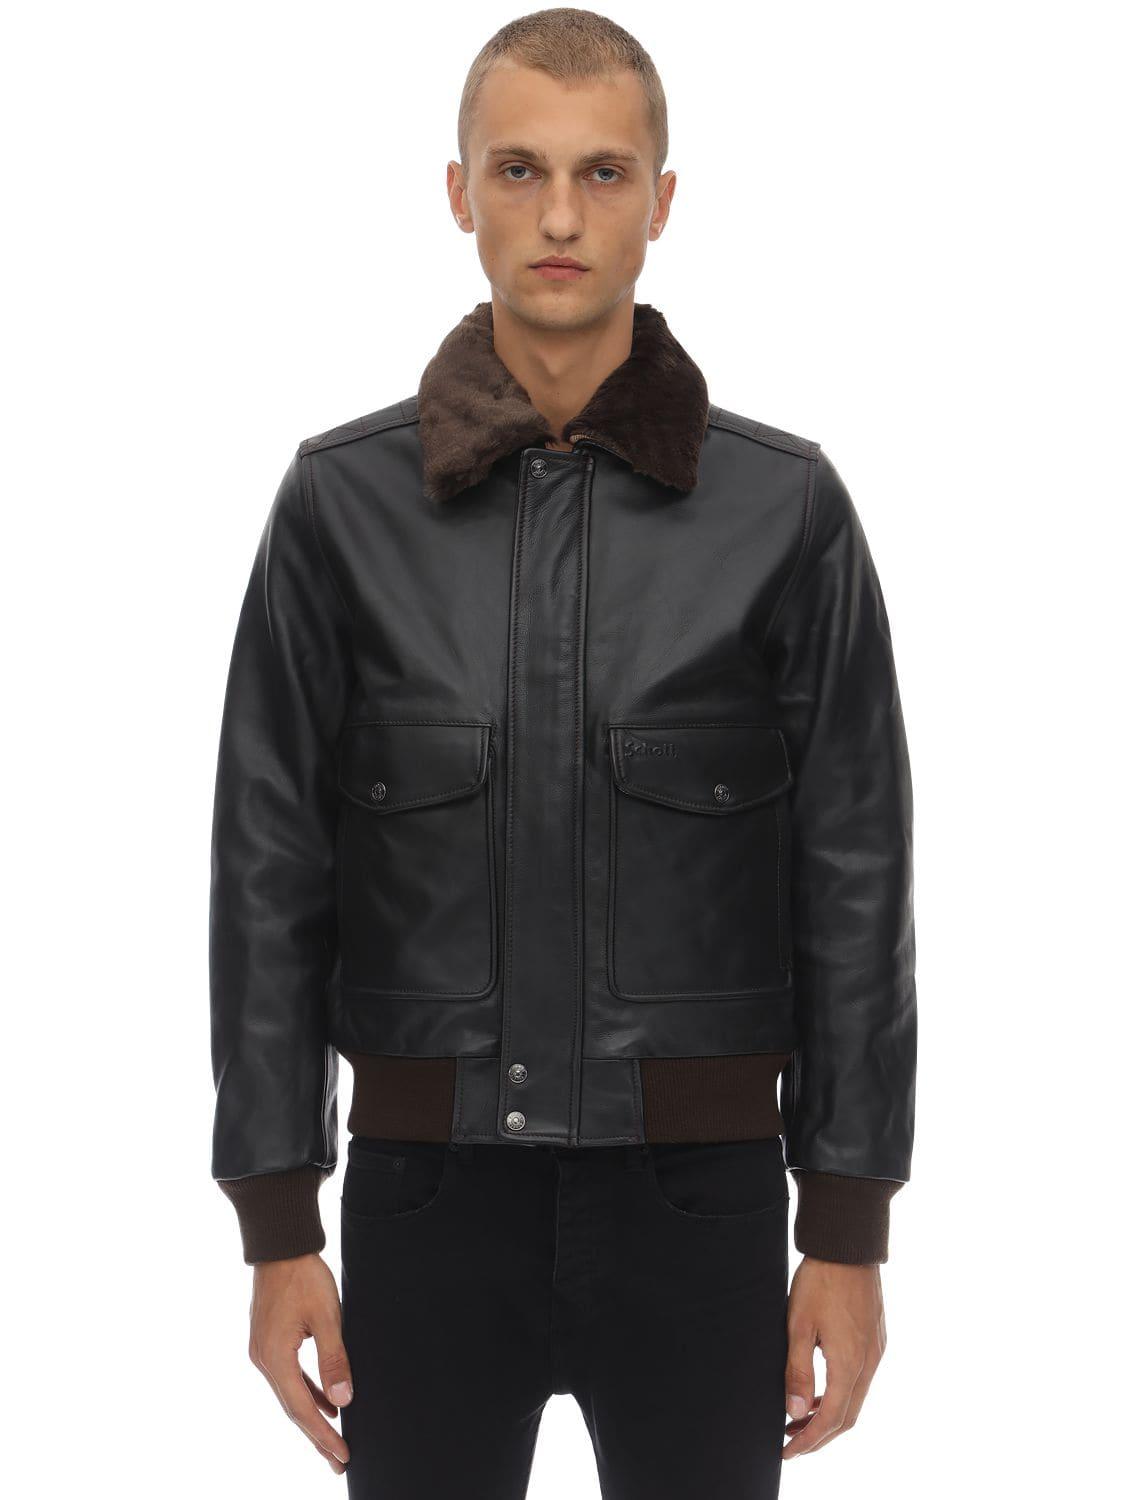 Schott Nyc Lc 5331 X Leather Jacket in Brown for Men - Lyst